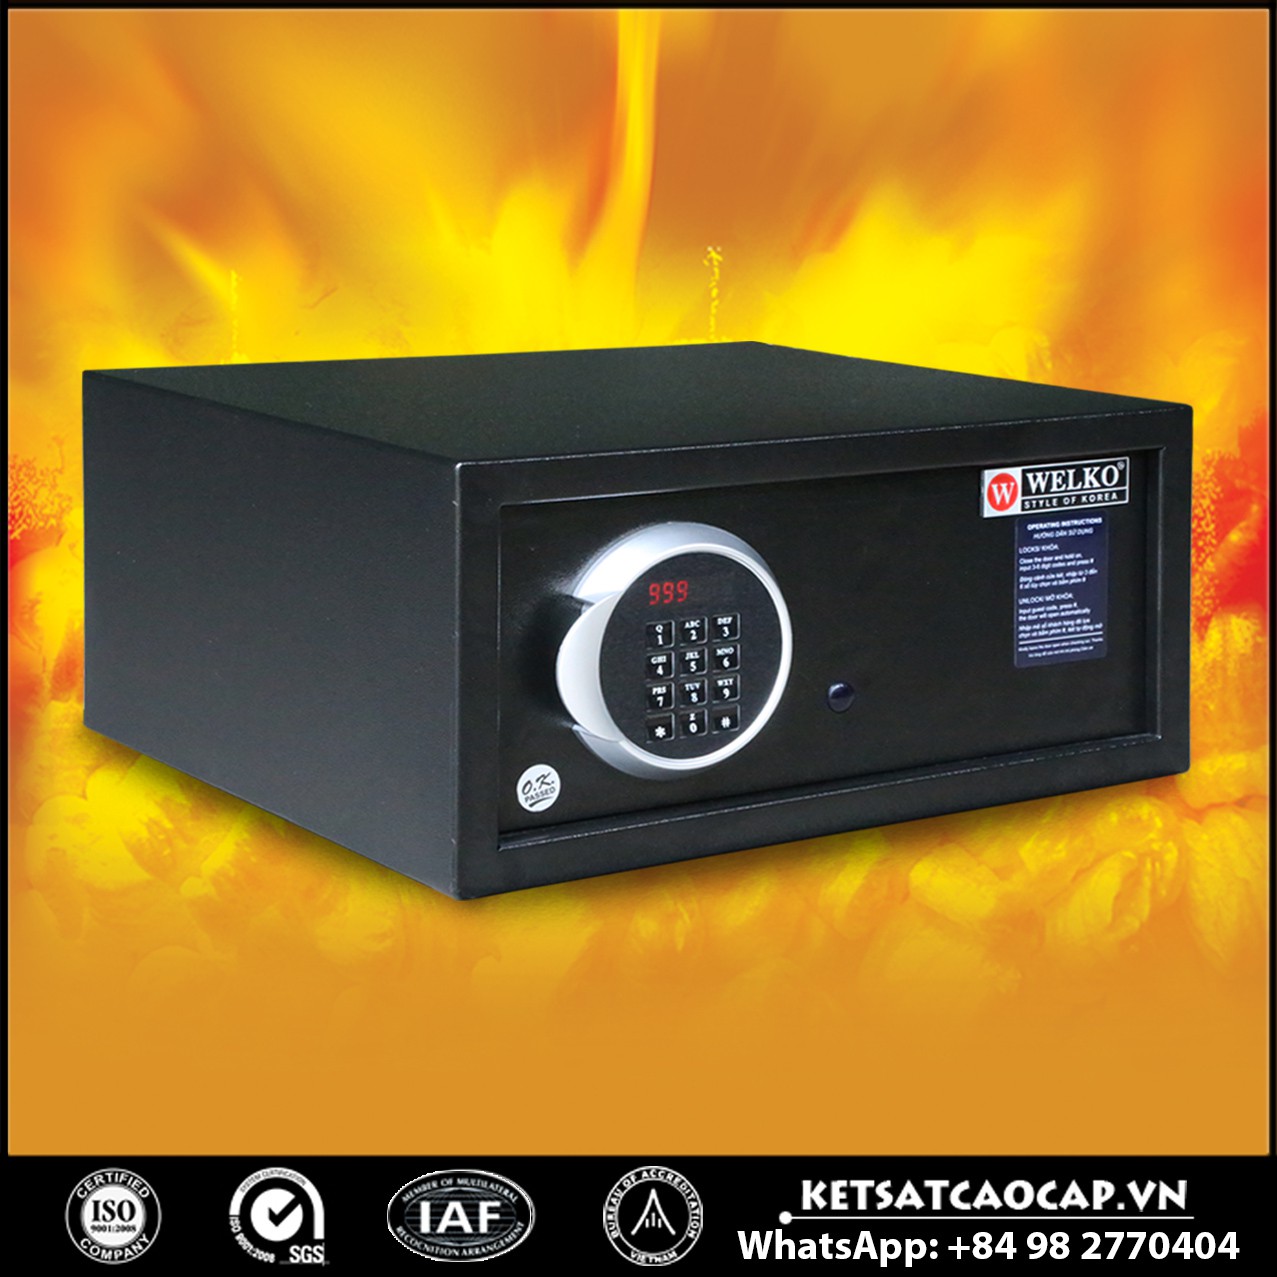 Fireproof Hotel Safety Deposit Box Manufacturers